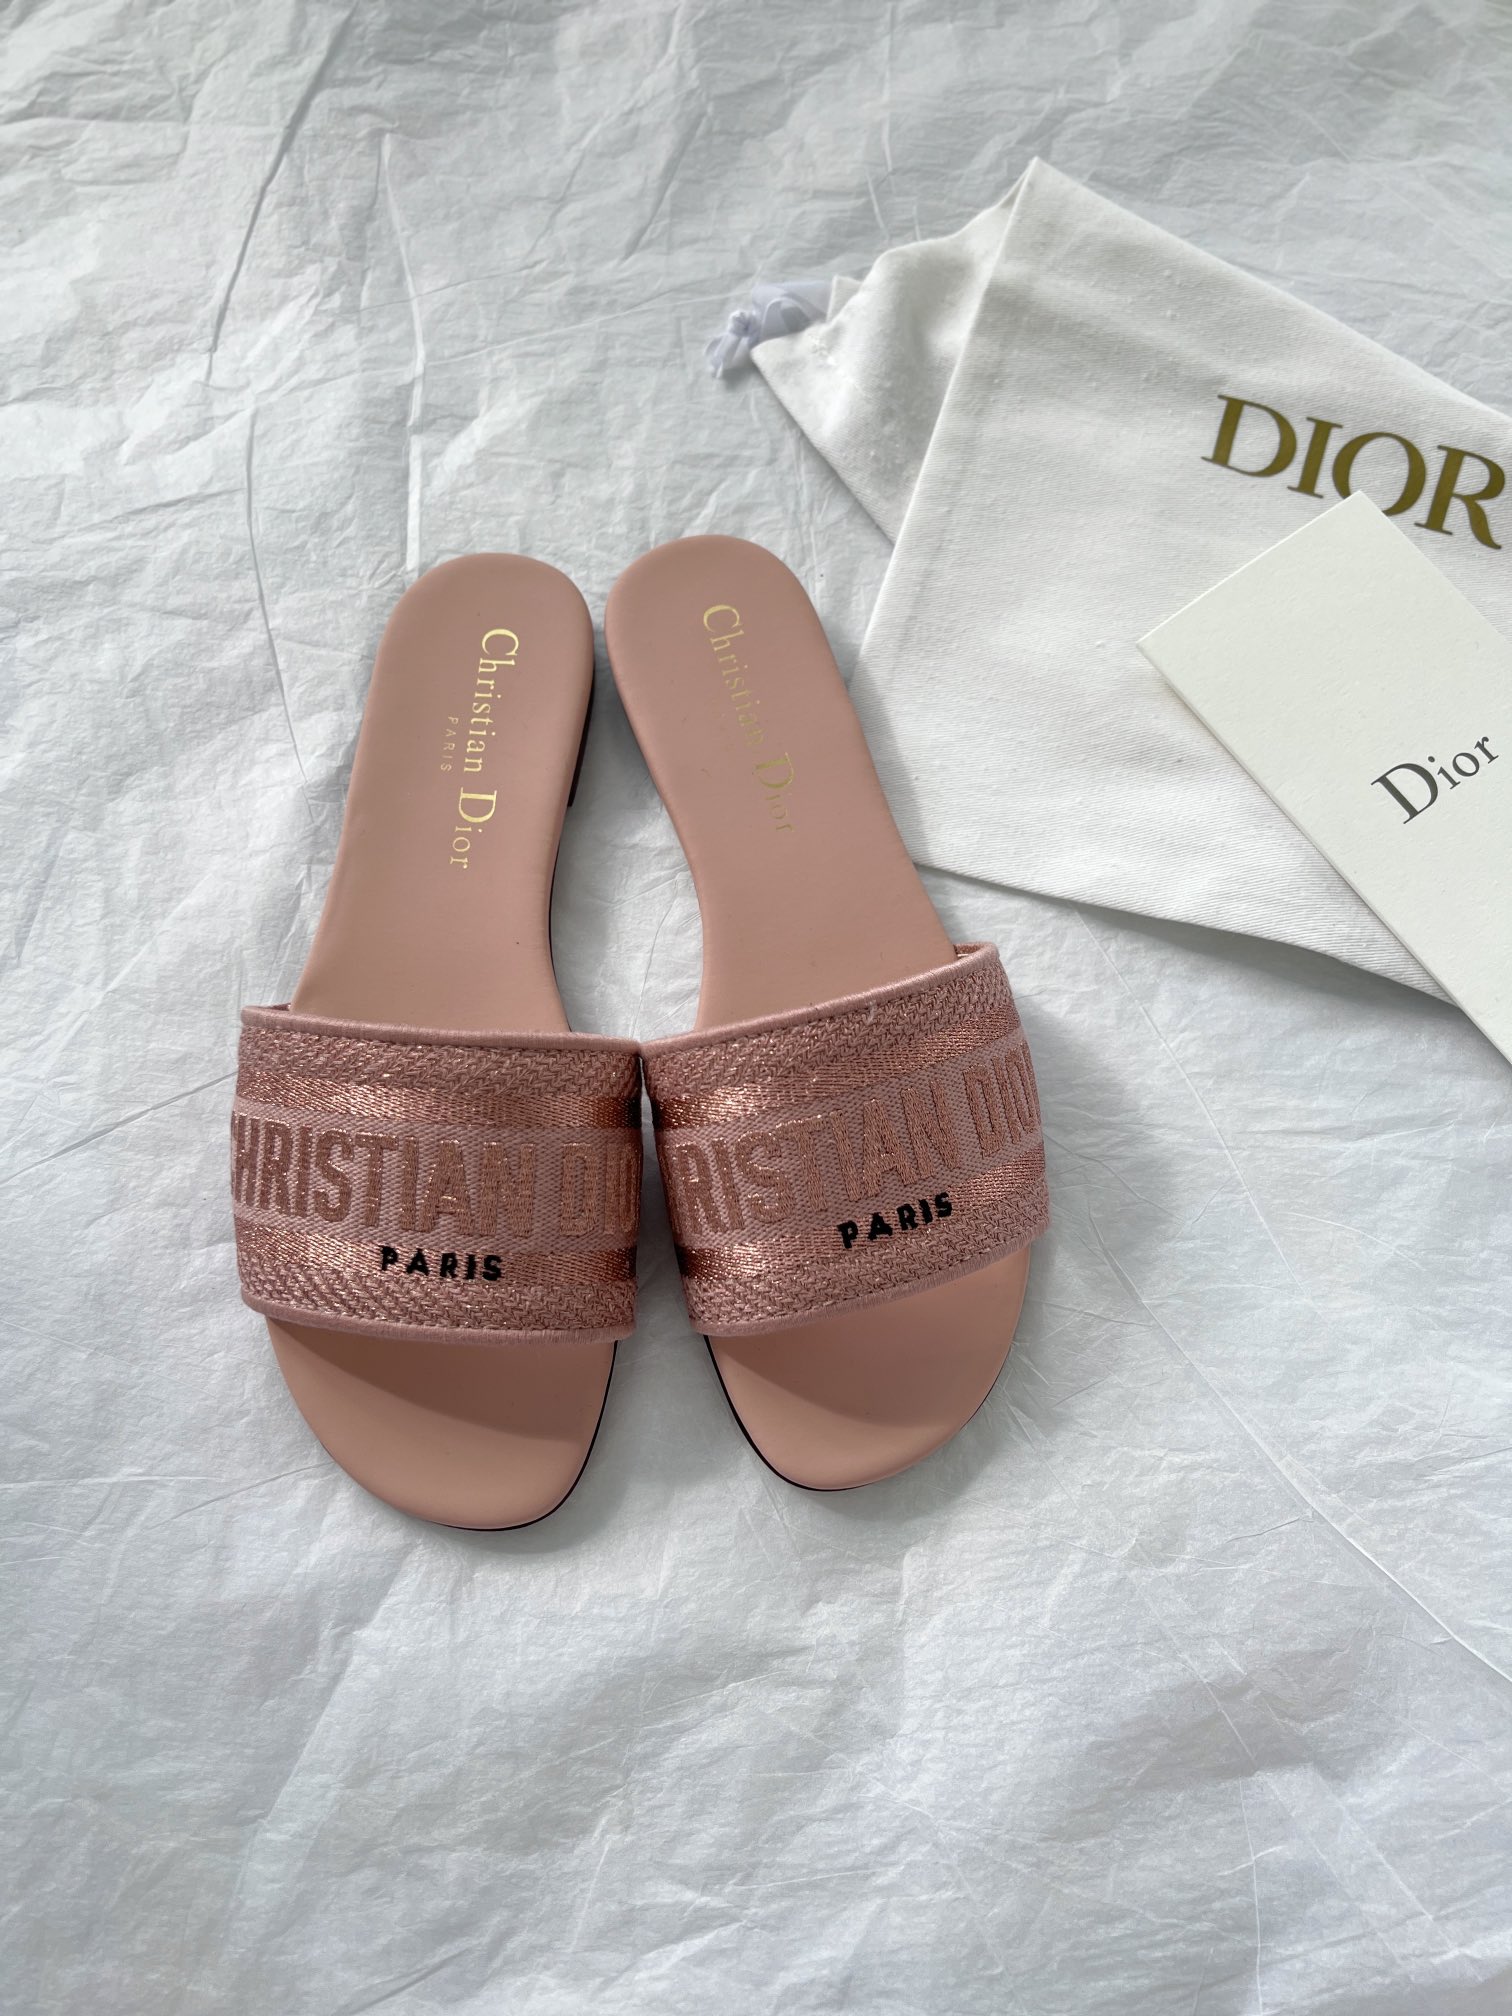 Dior Shoes Slippers Embroidery Cotton Cowhide Genuine Leather Spring/Summer Collection